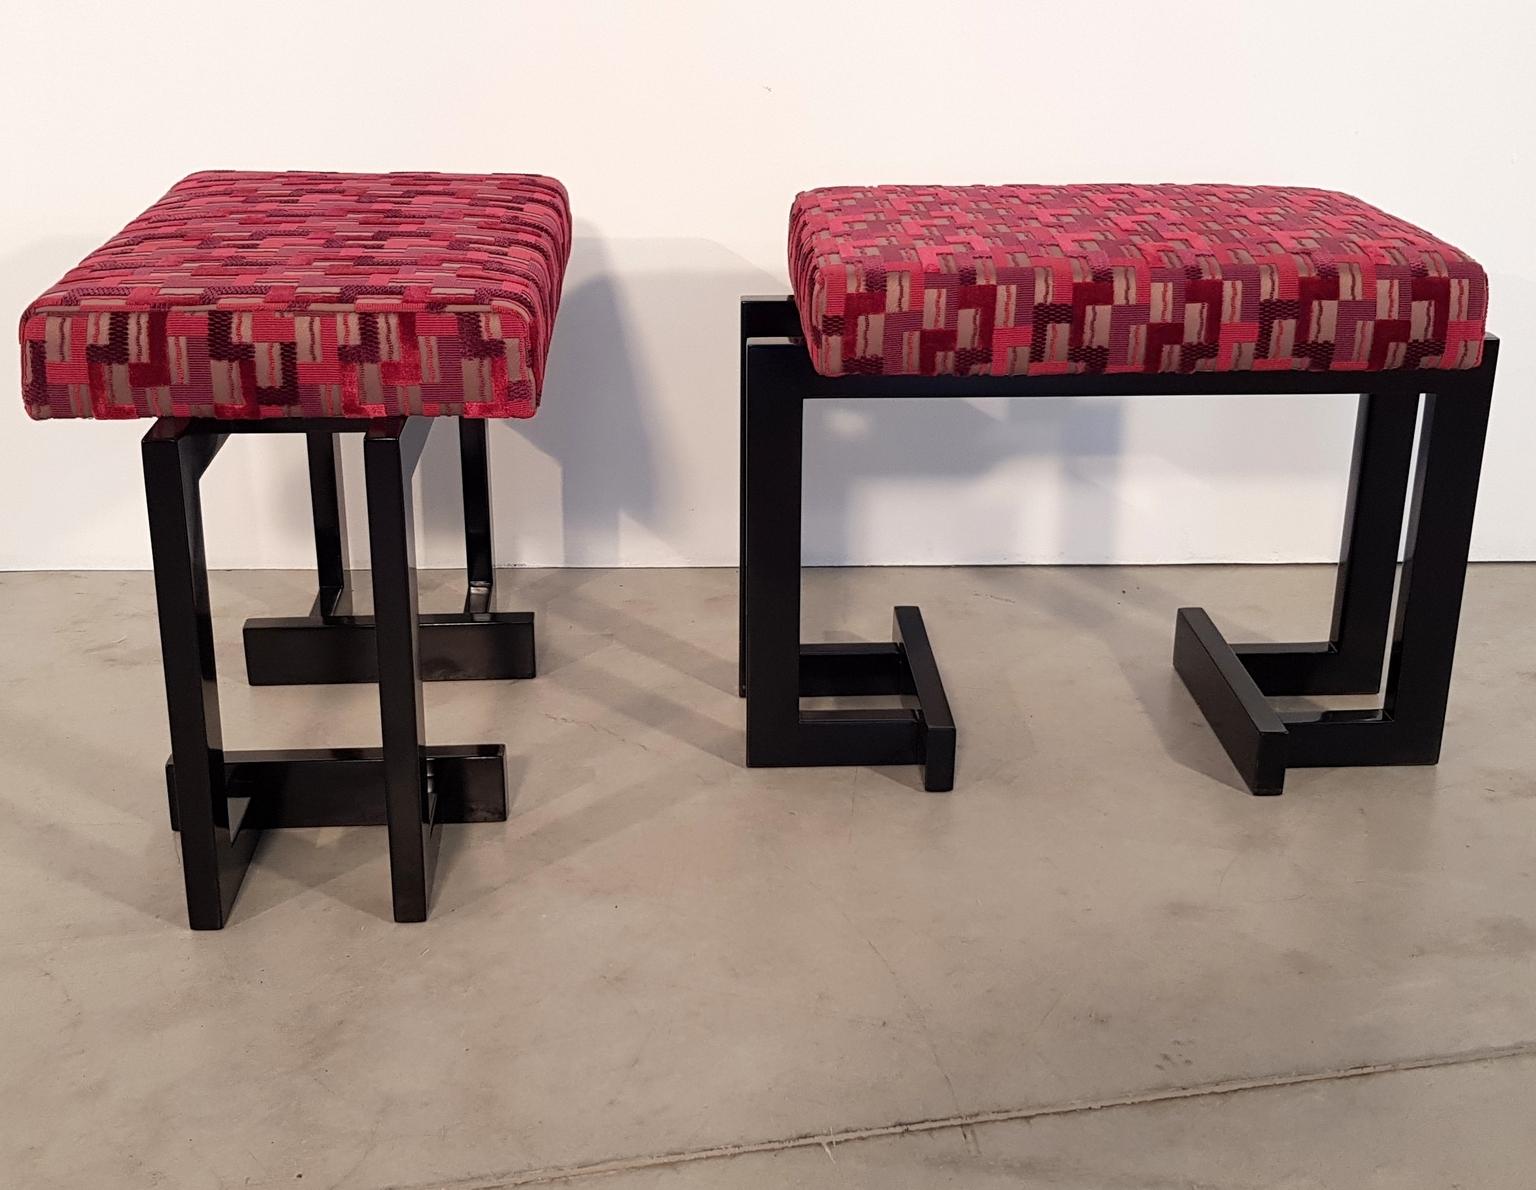 Incredible pair of art deco stools with lacquered black painted wood and beautiful 3-D textile. France, 1940s. Recently restored.